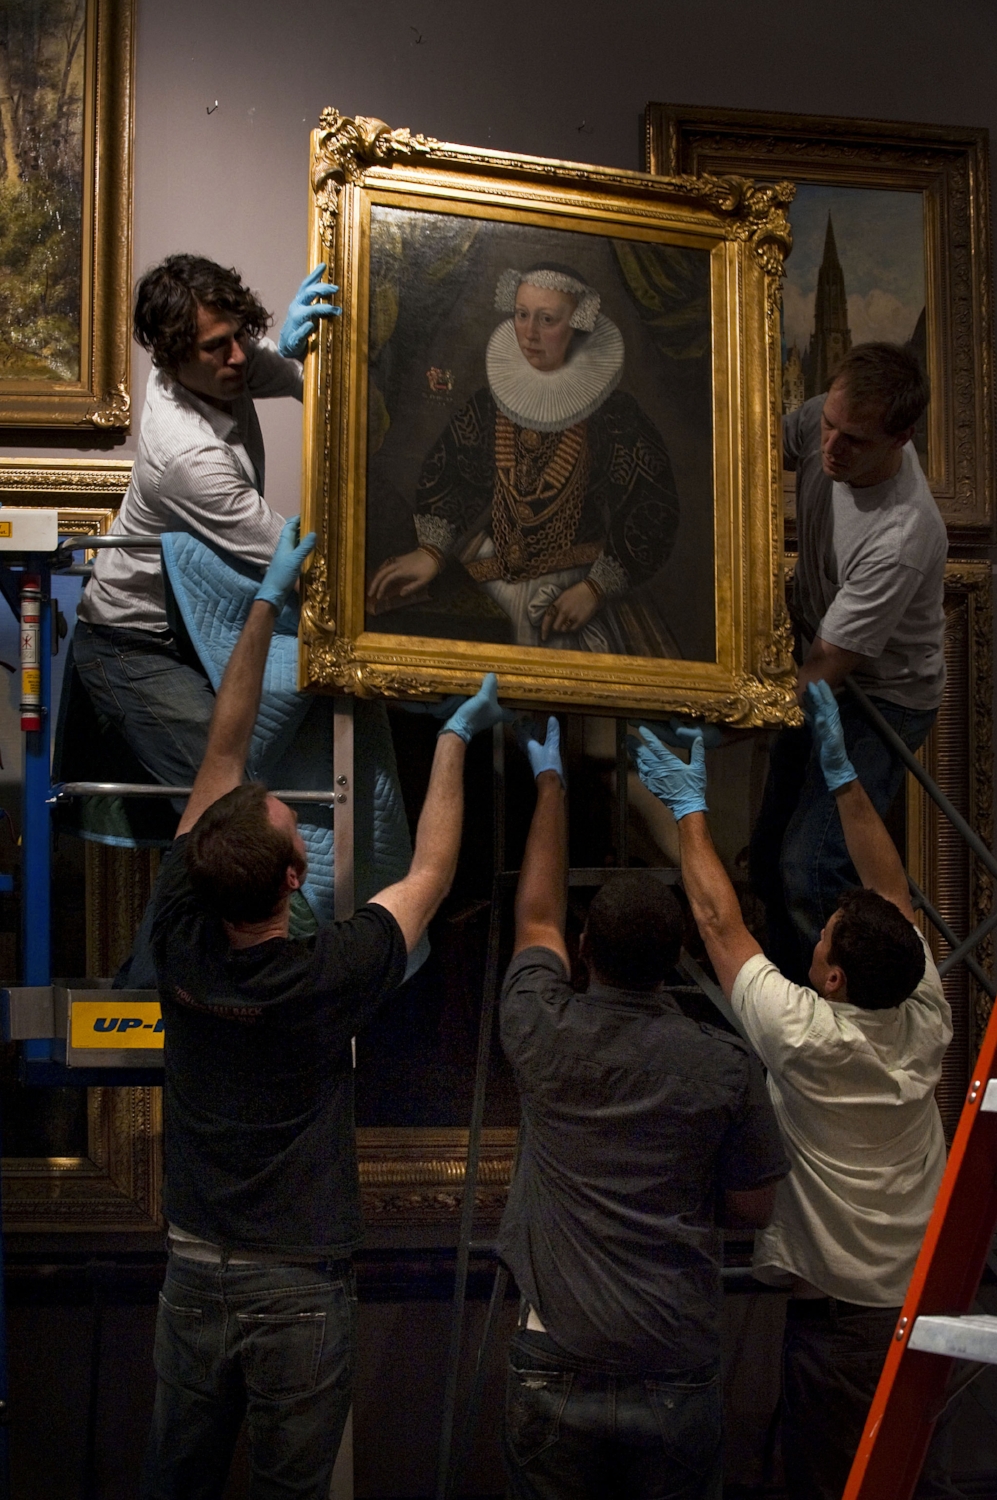  Exhibition technicians remove artwork from the California Gallery at the Crocker Art Museum in Sacramento on Thursday, June 10, 2010. 